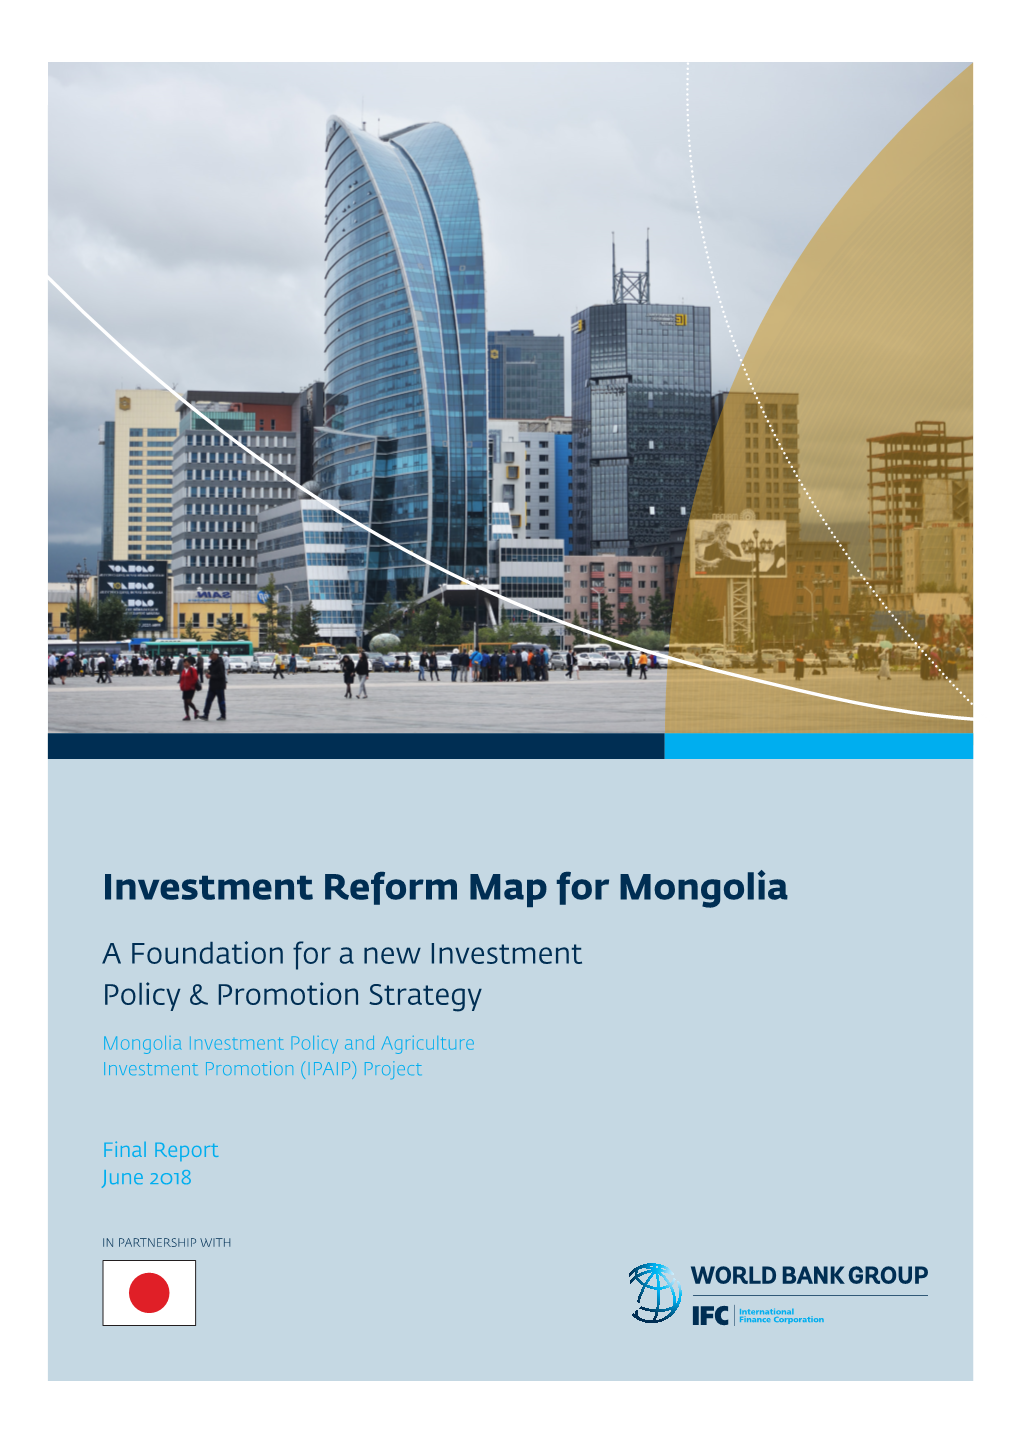 Investment Reform Map for Mongolia 2018